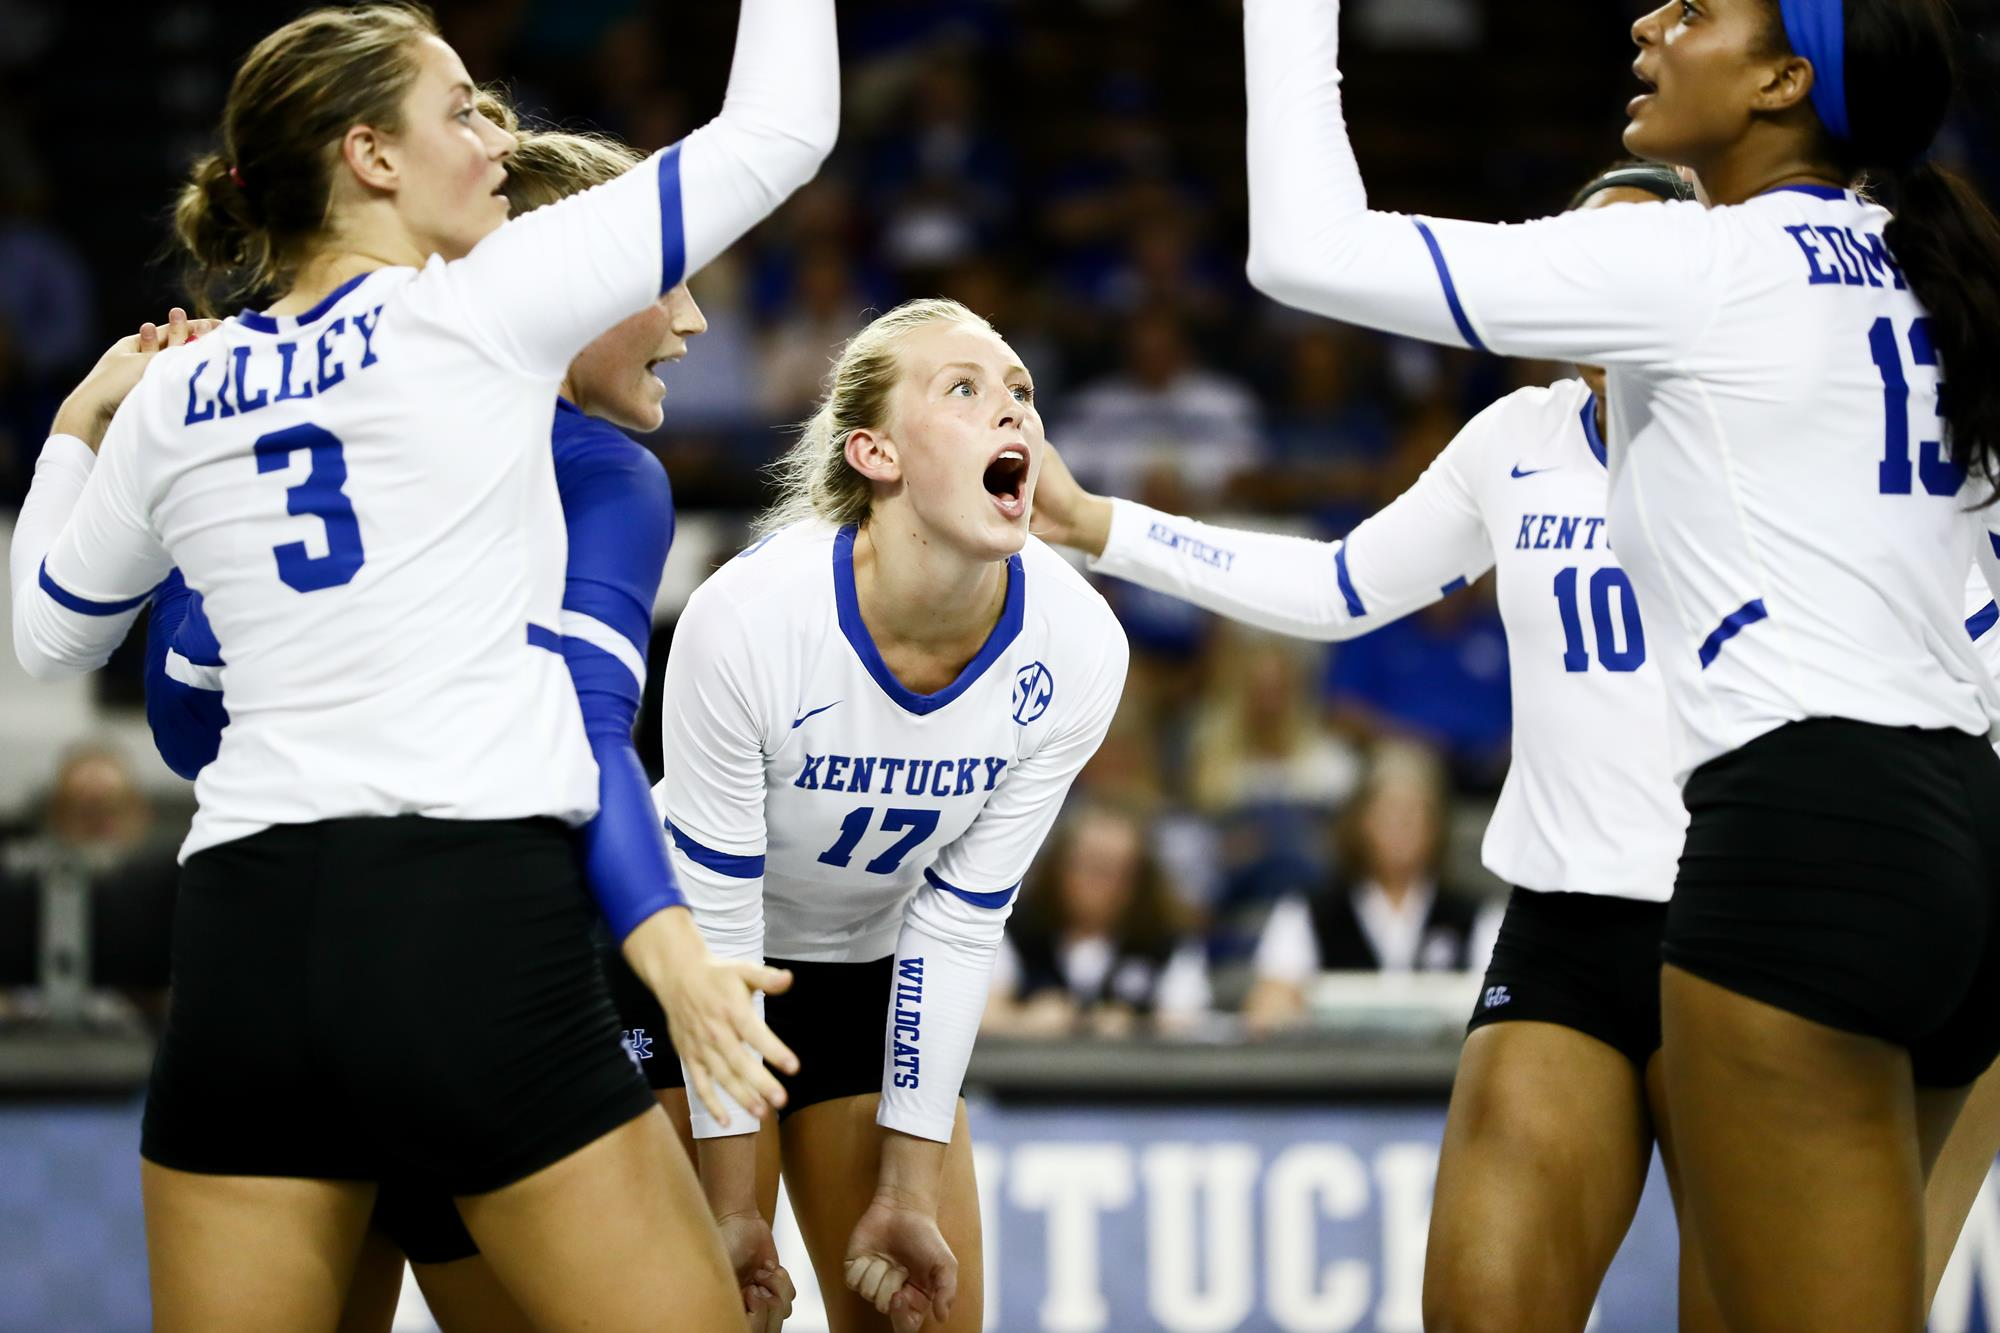 Leah Edmond’s 14 Kills Moves Kentucky to 3-0 in SEC, Past USC